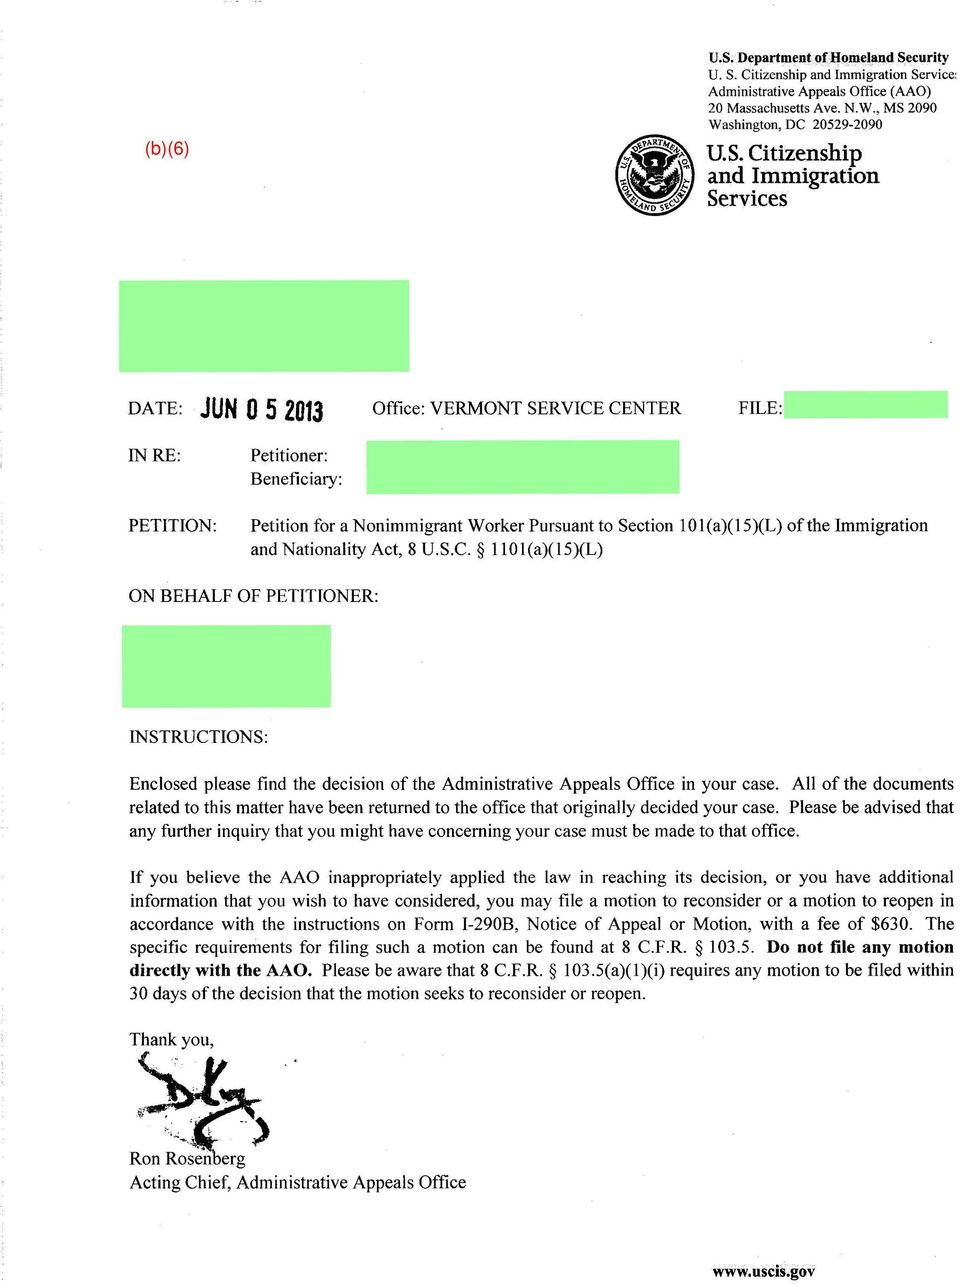 Immigration and Nationality Act, 8 U.S.C. IIOl(a)(lS)(L) ON BEHALF OF PETITIONER: INSTRUCTIONS: Enclosed please find the decision of the Administrative Appeals Office in your case.